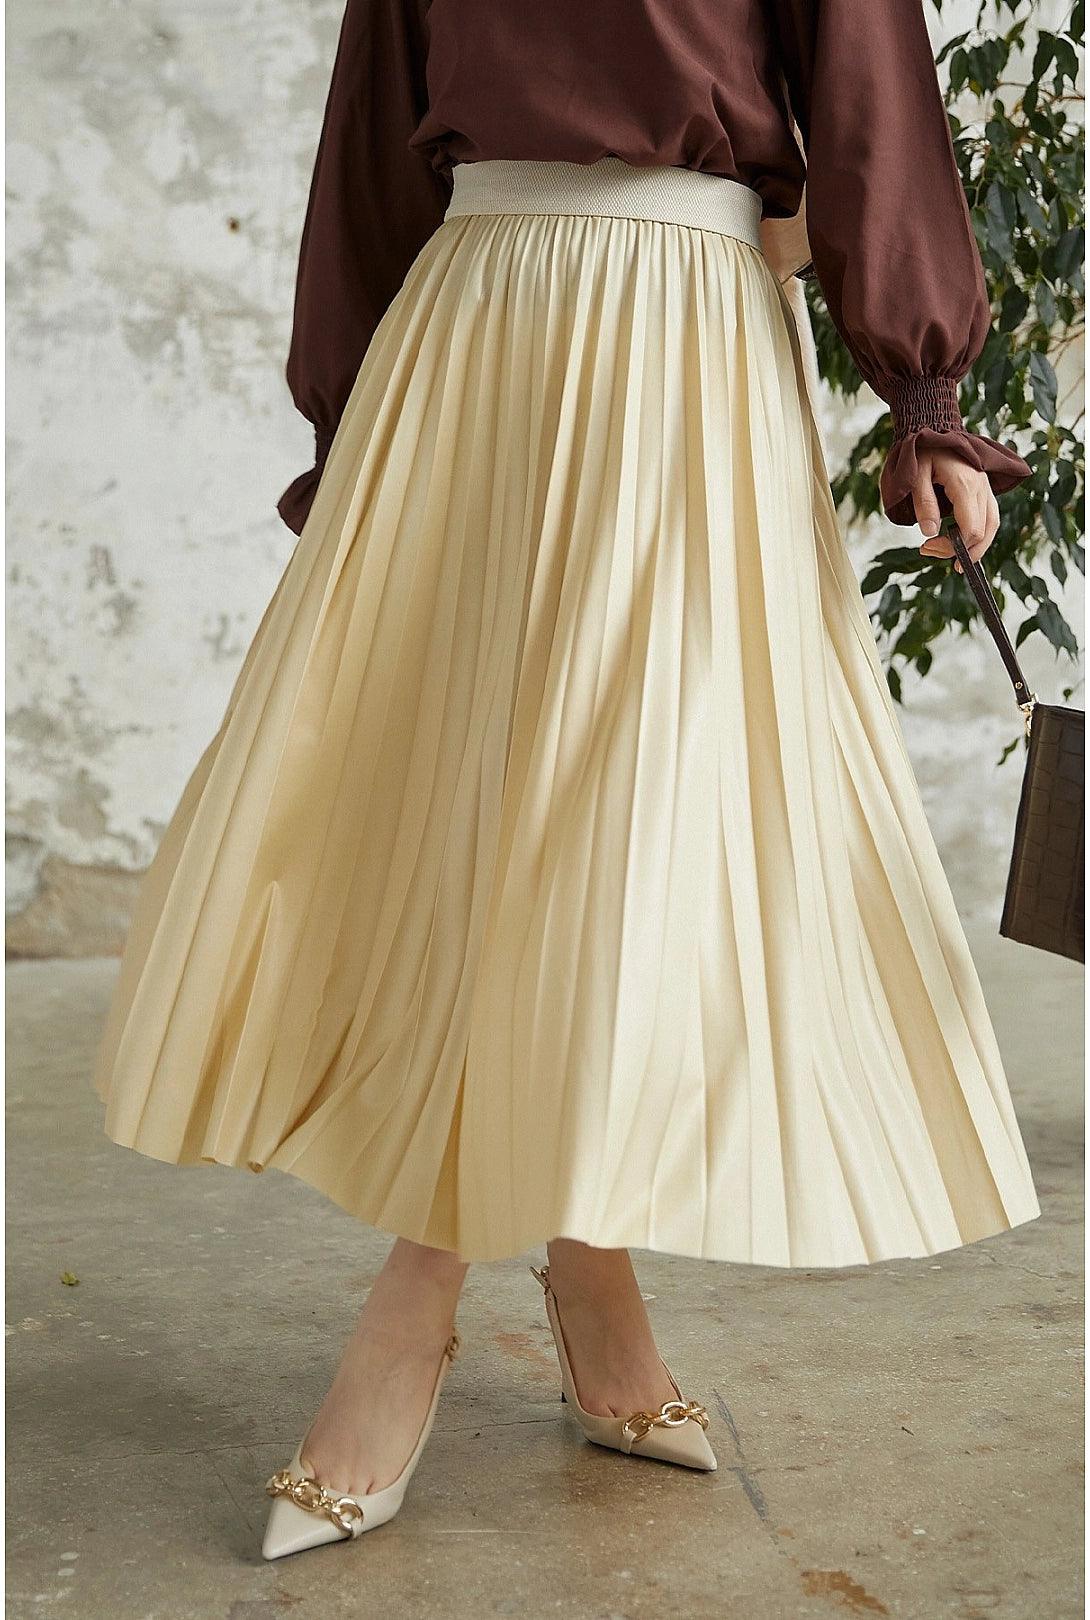 Leather Look Long Maxi Skirt for Women - Creamy Beige